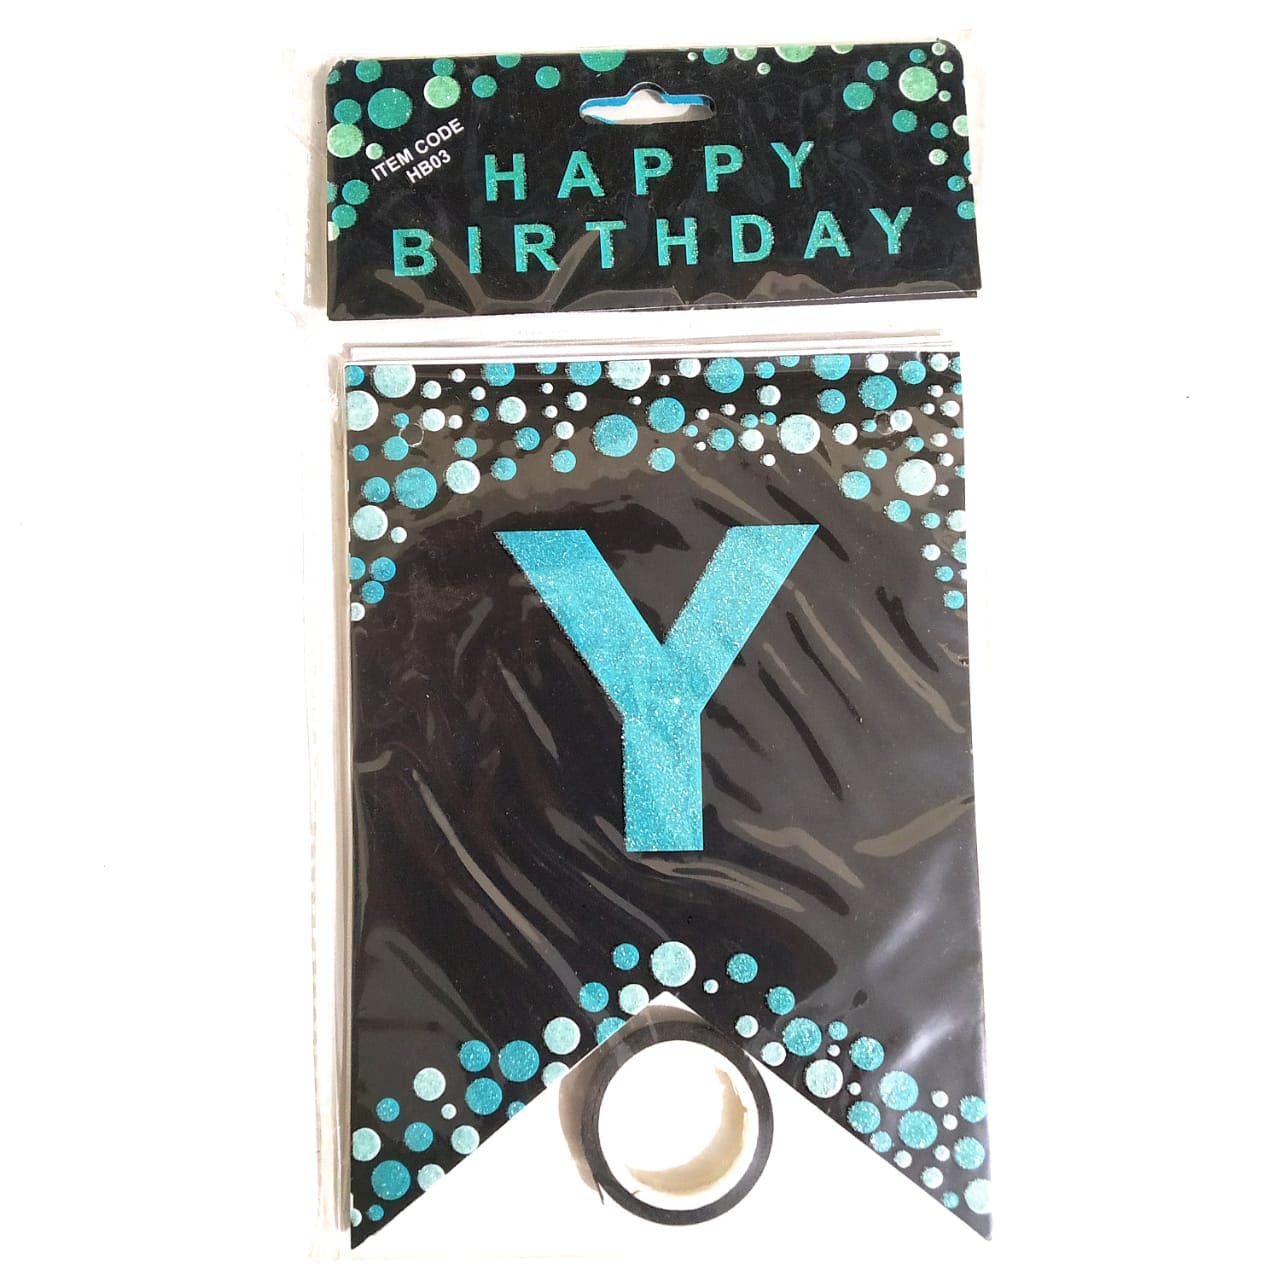 Inkarto Celebrate in Style with Our Black and Blue Happy Birthday Banner